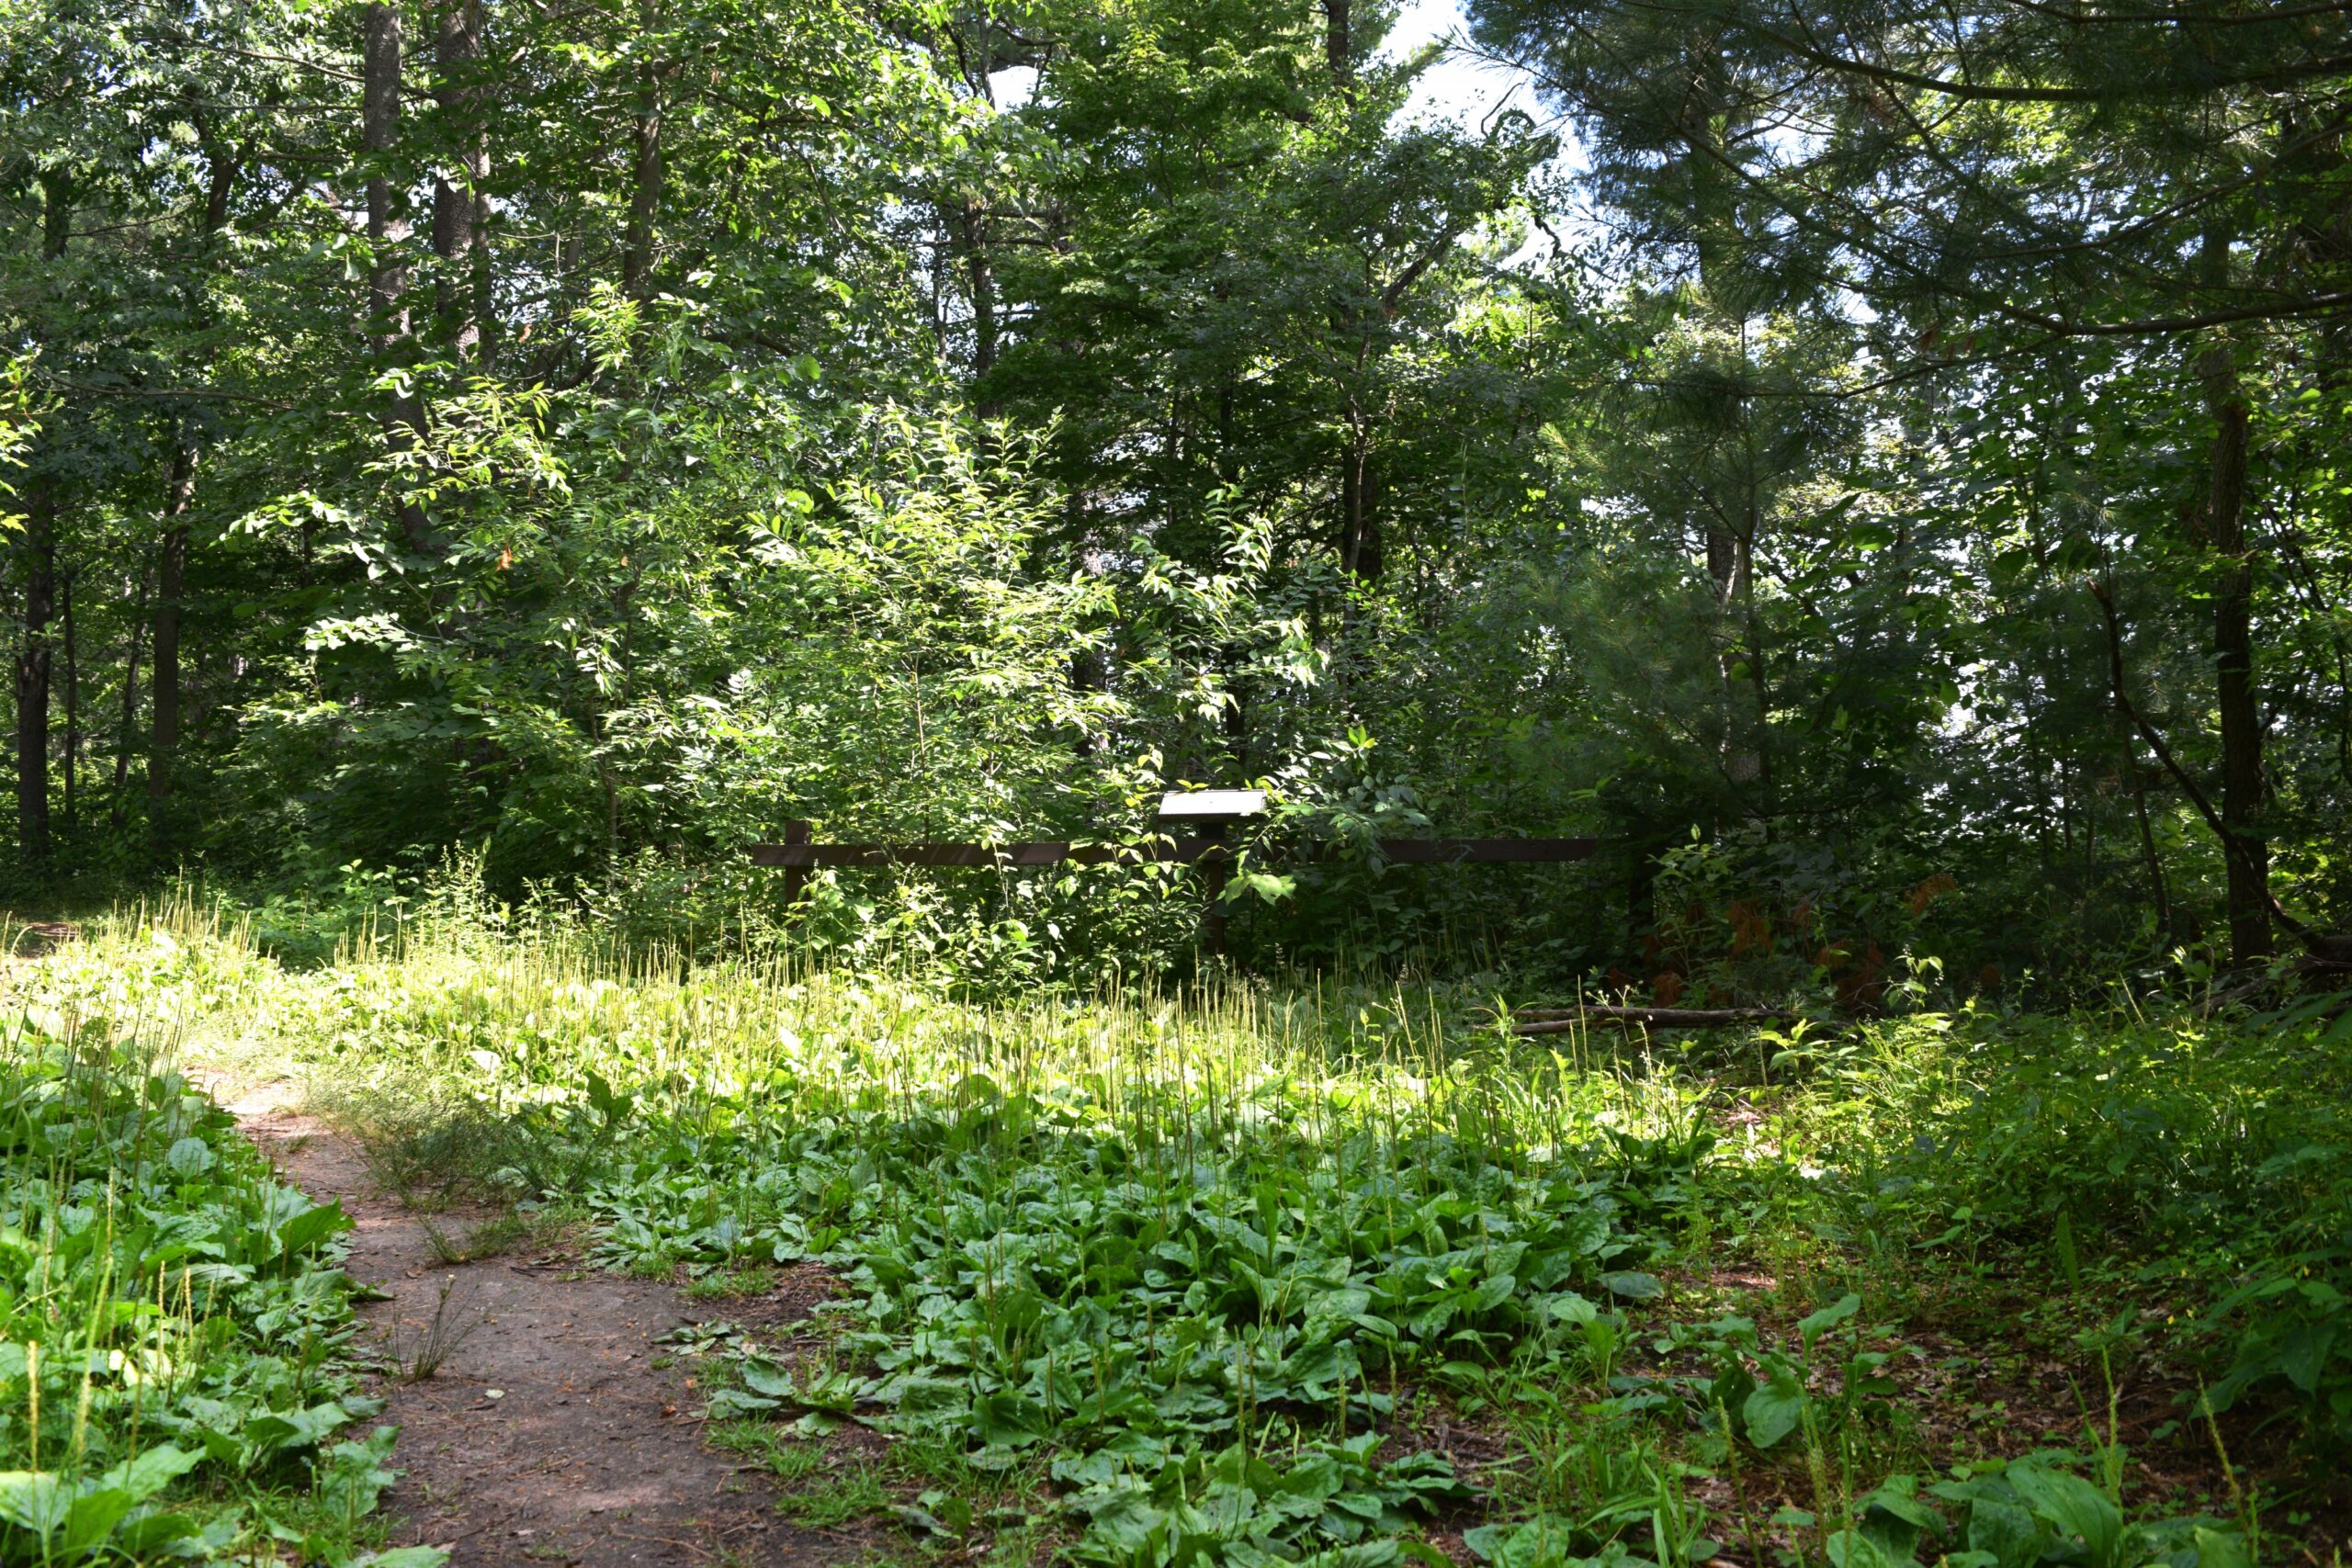 An unpaved path along the Lake Trail at Lake Wissota State Park bypasses an effigy mound, a sacred burial site that dates back more than 1,000 years